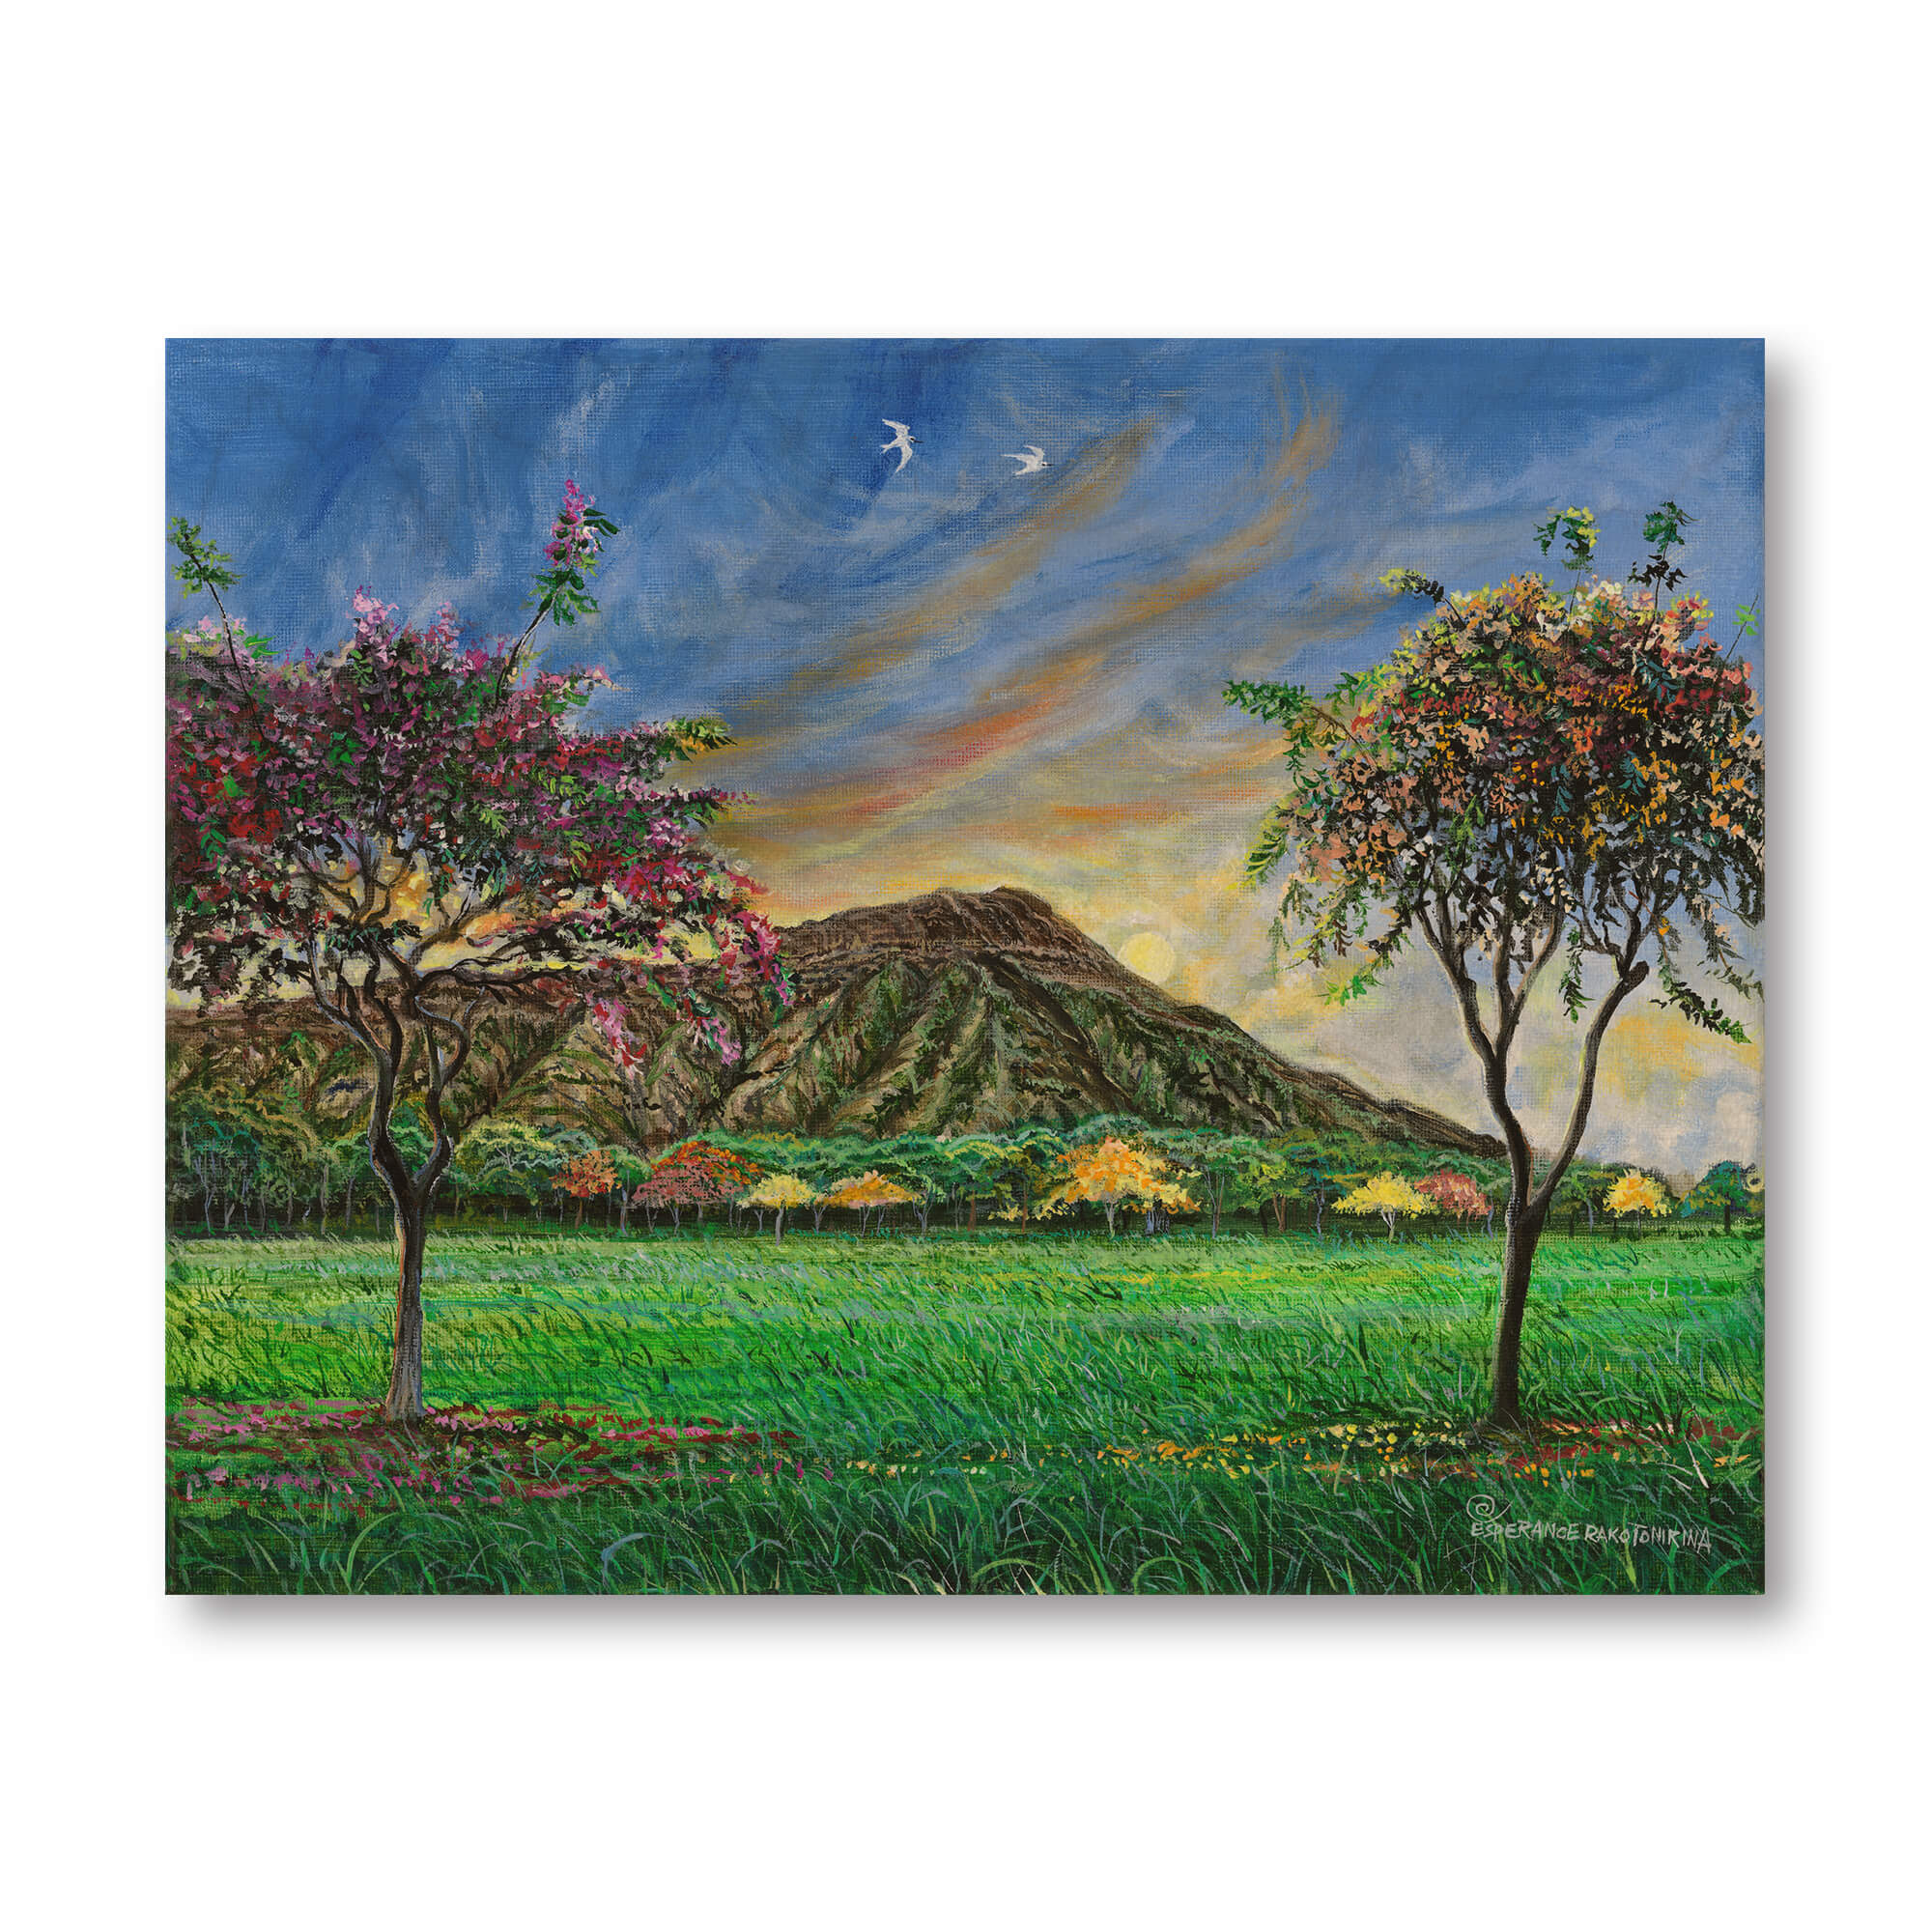 Wood art print featuring a Majestic mountain view with a forested backdrop by hawaii artist Esperance Rakotonirina